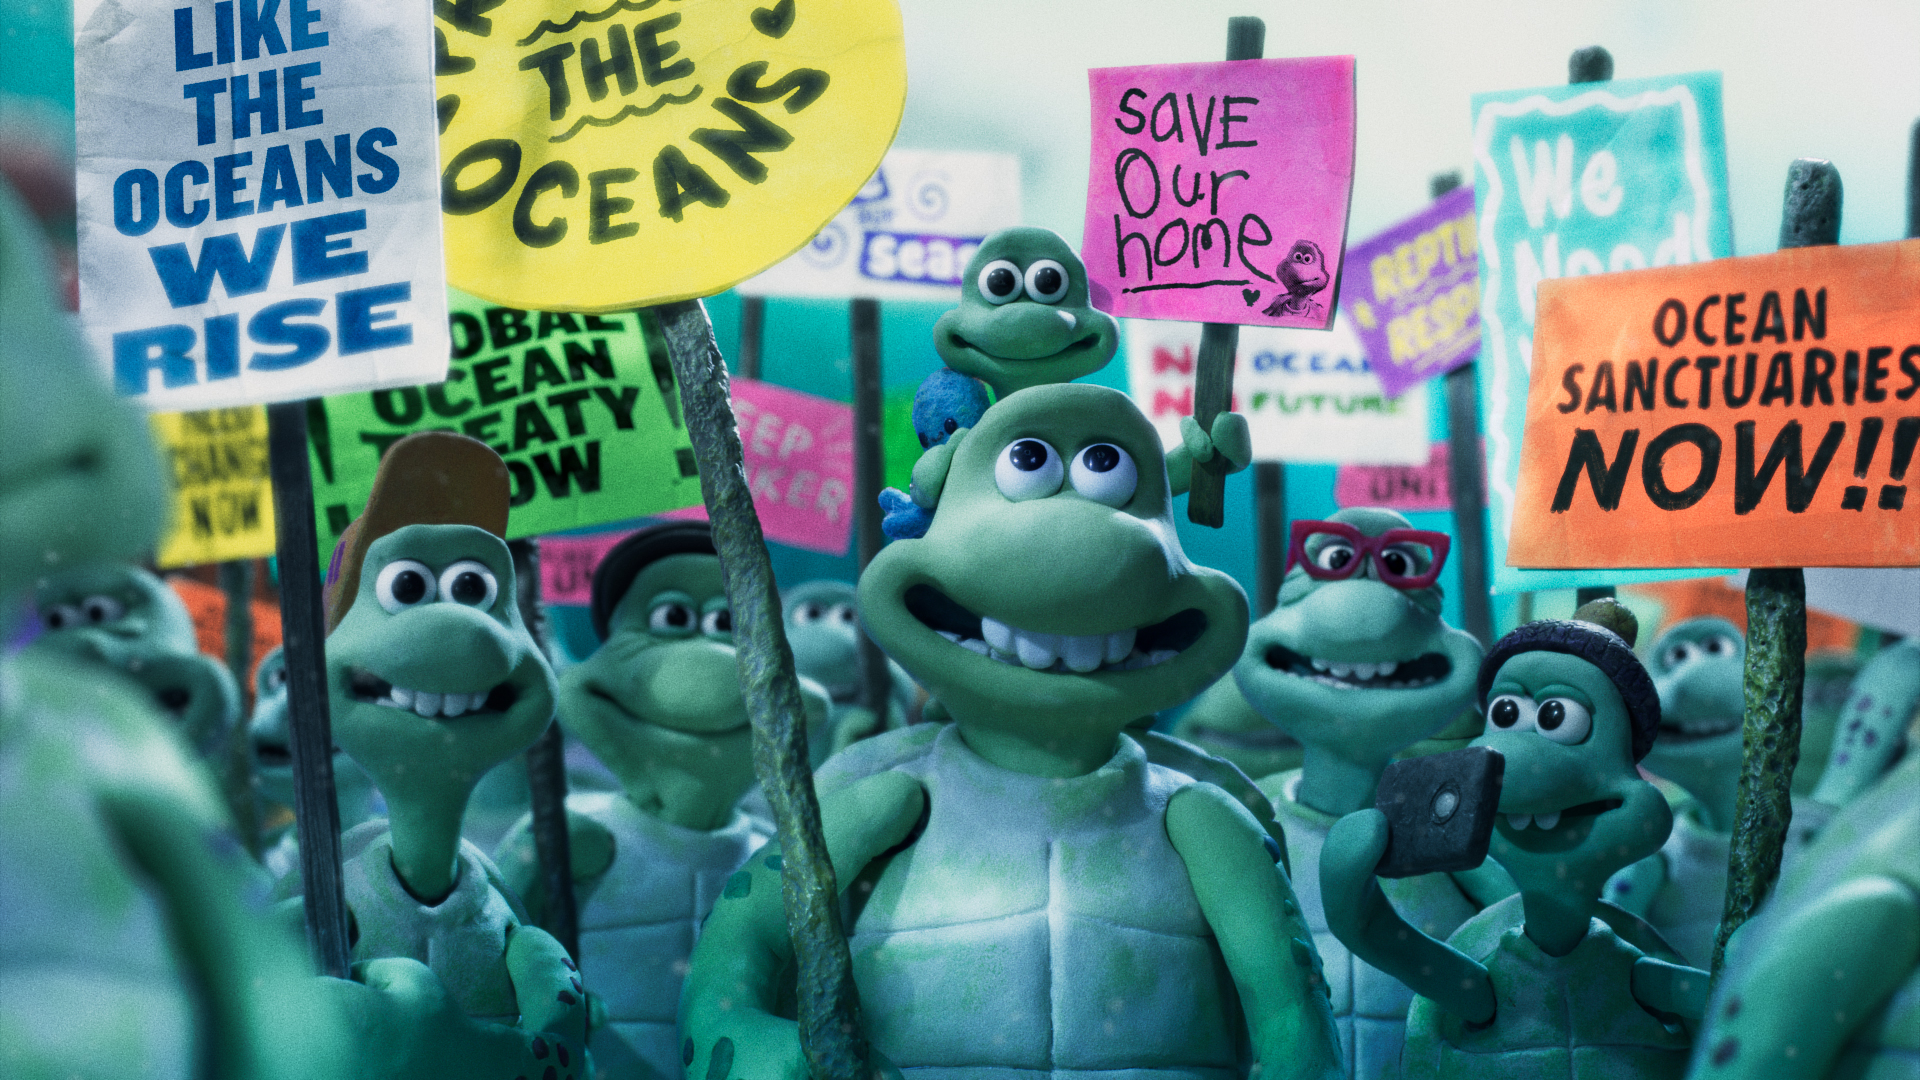 Video grab taken from the stop motion animation 'Turtle Journey', produced by Aardman Animations and Greenpeace UK to highlight the plight of the oceans.